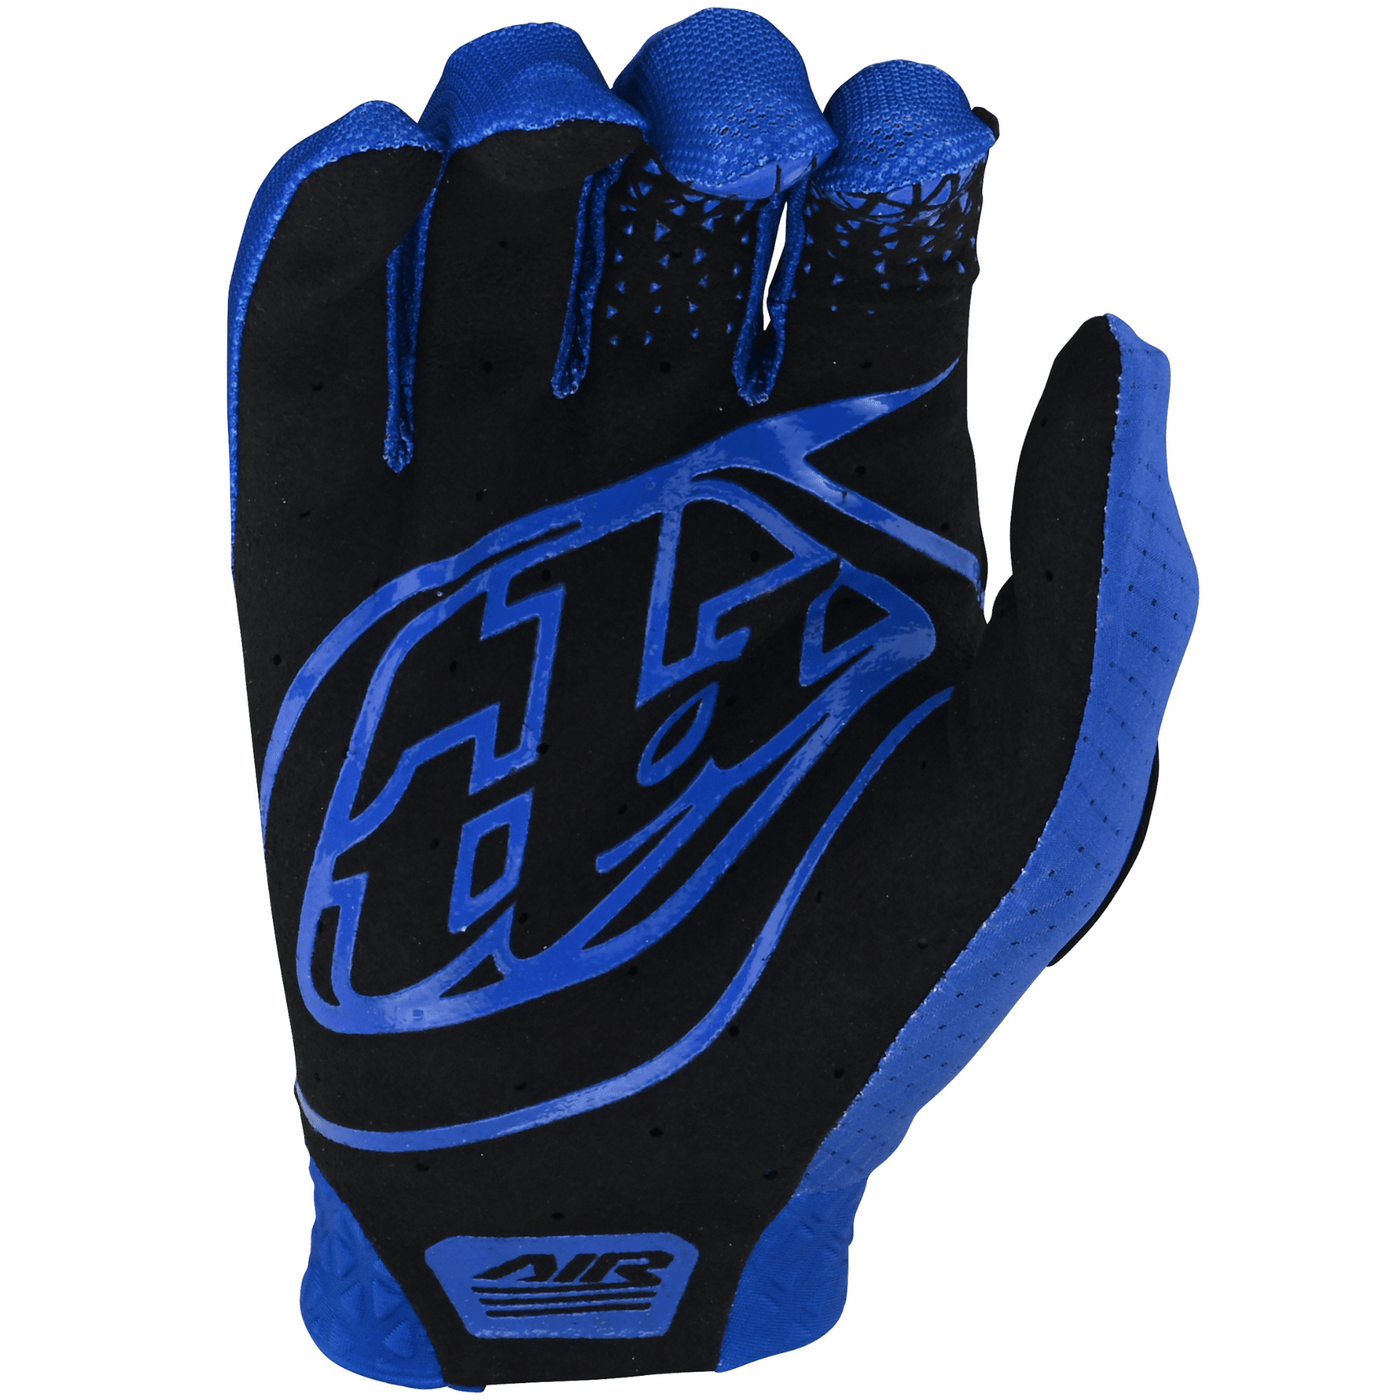 Troy Lee Designs Youth Gloves AIR Solid - Blue